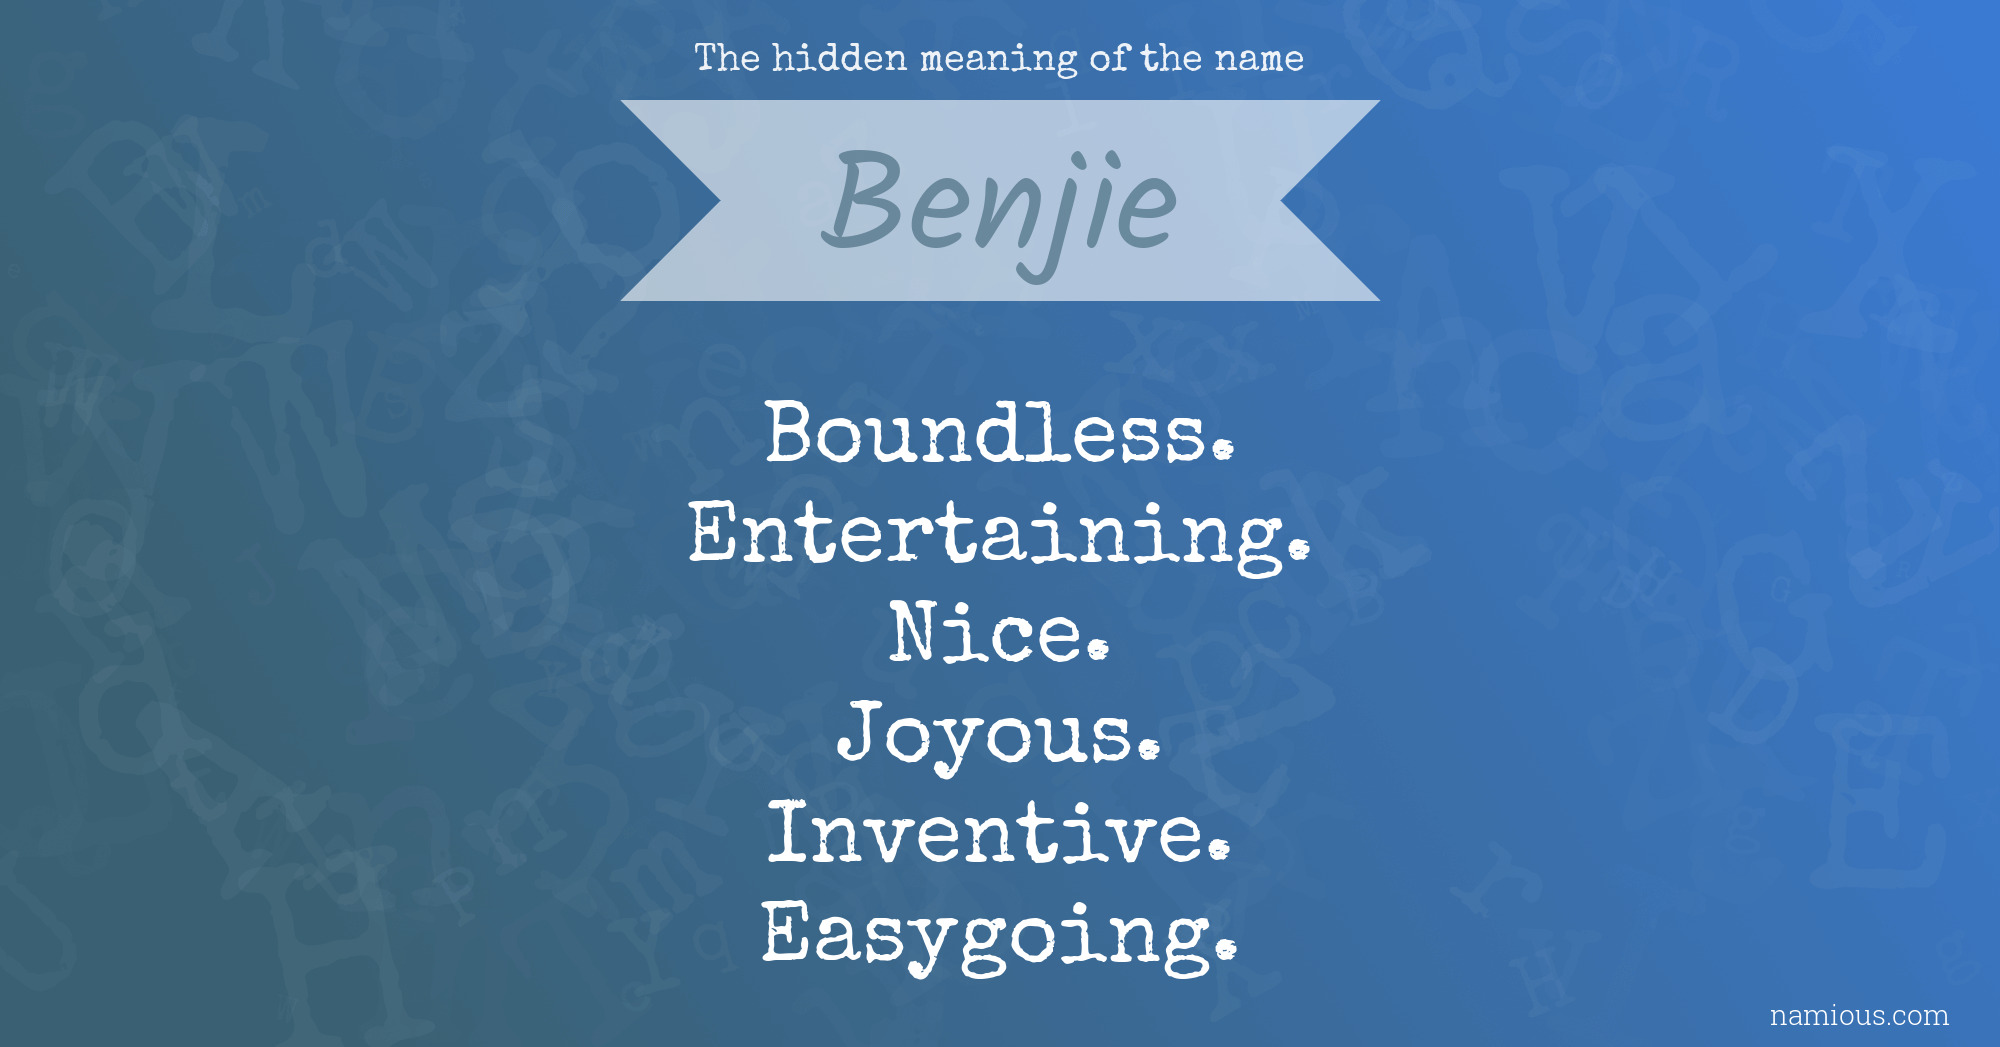 The hidden meaning of the name Benjie